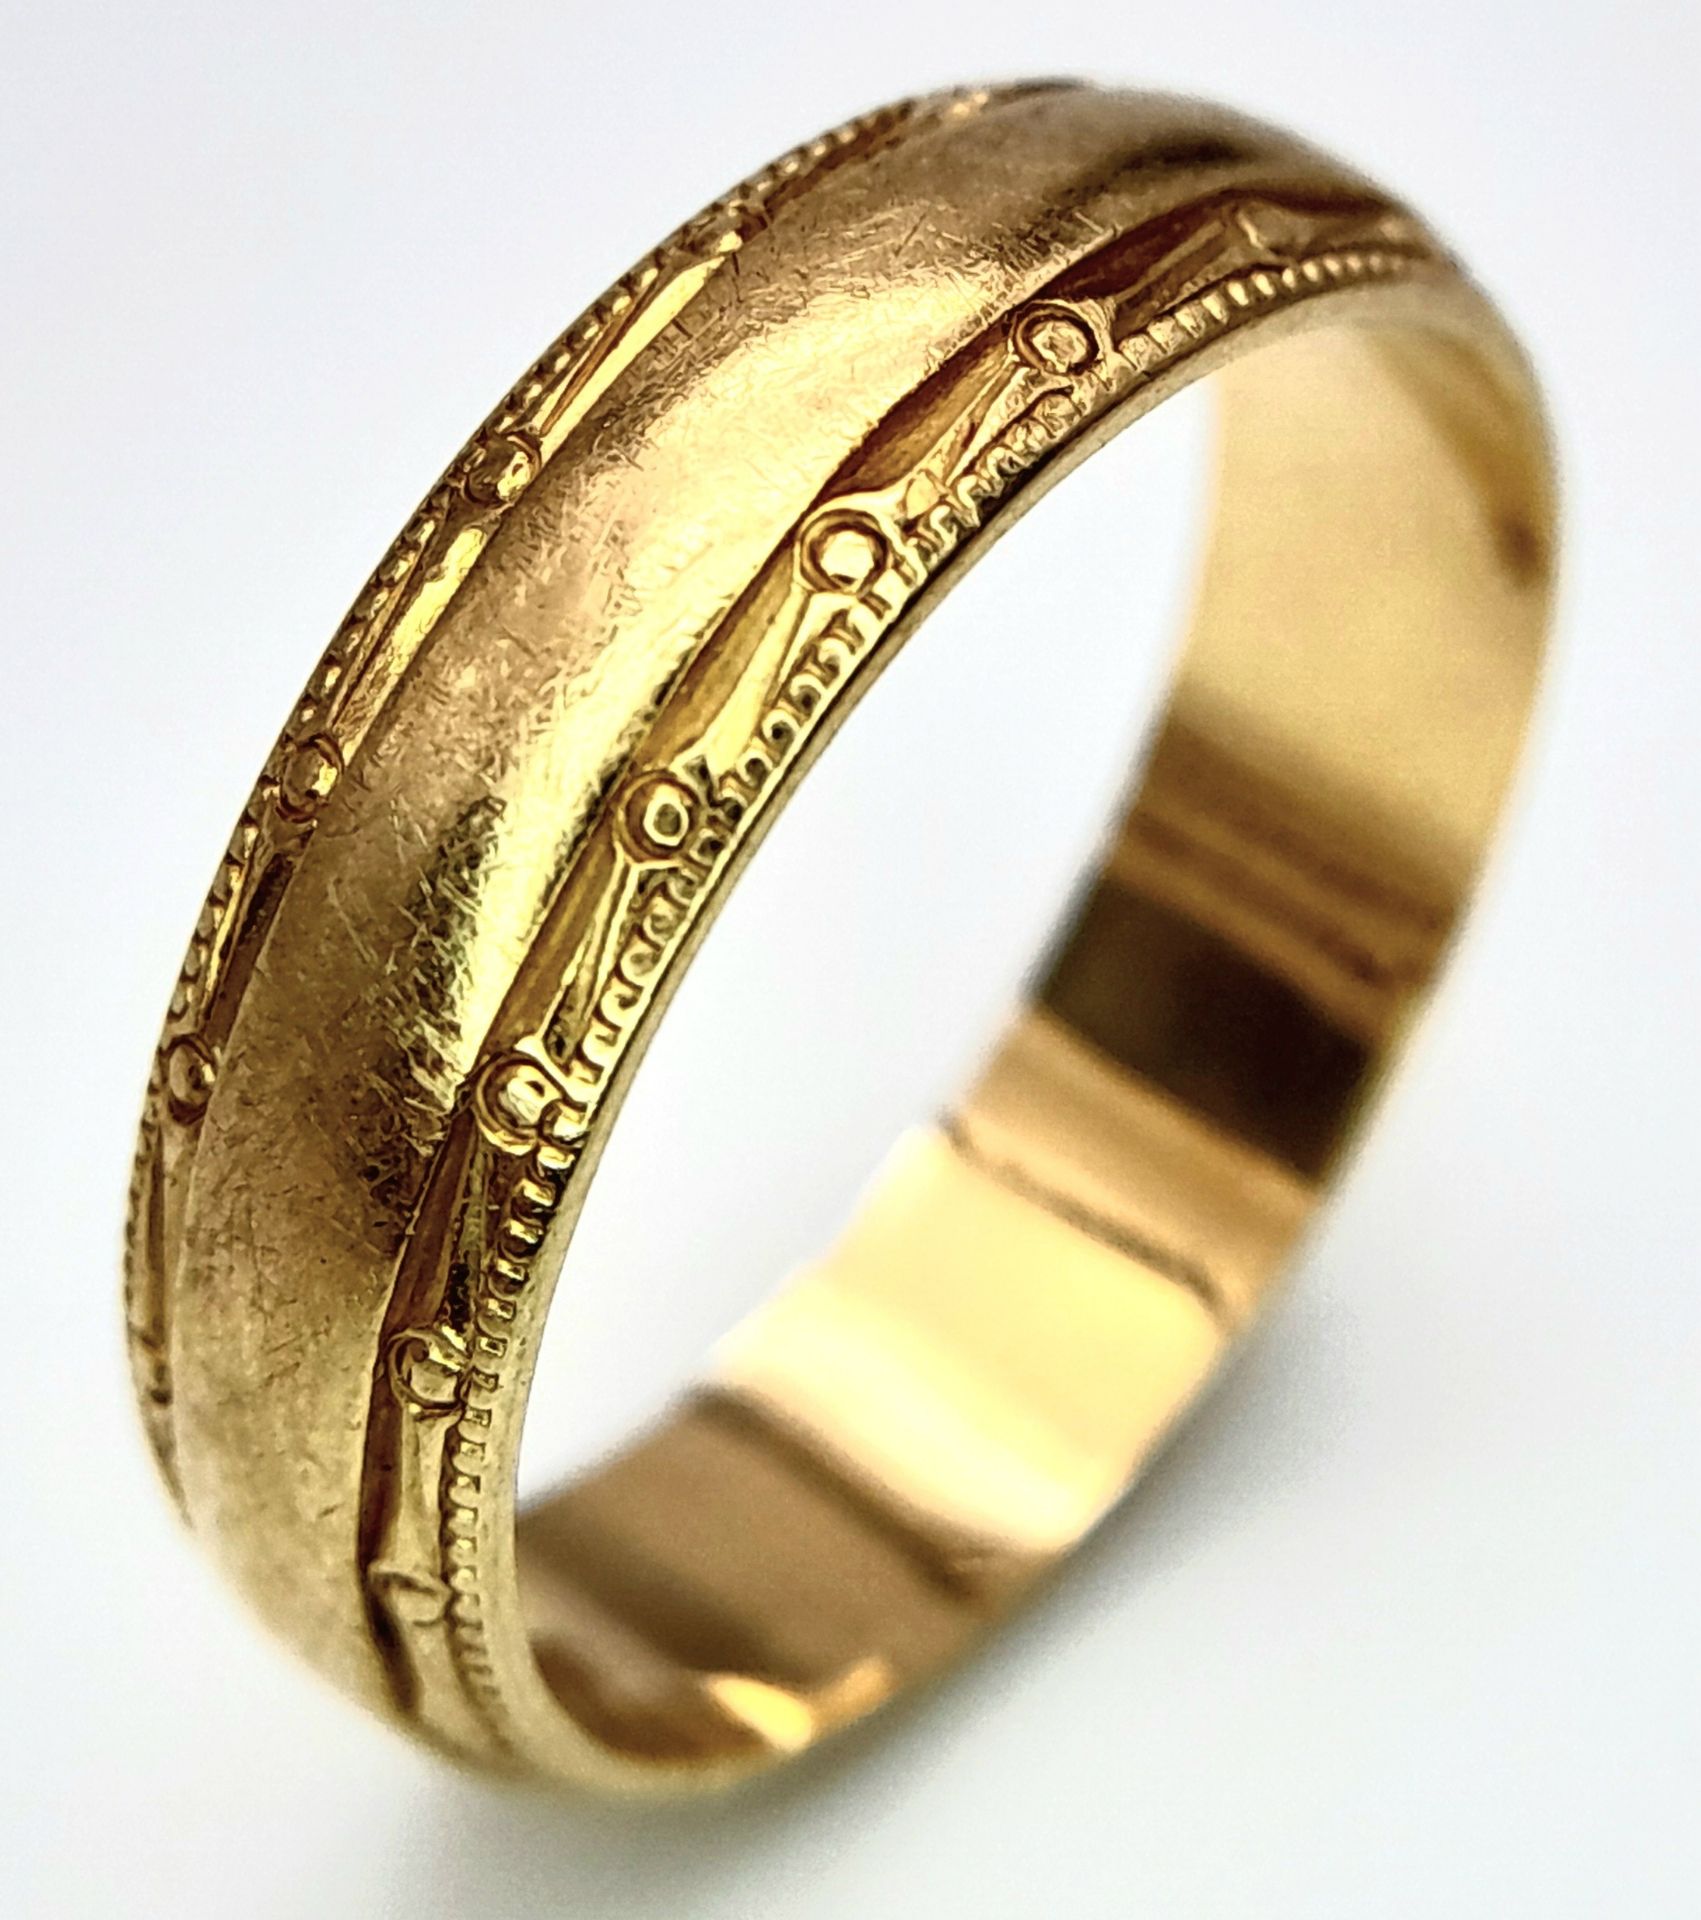 An 18 K yellow gold band ring with engraved rims. Size: M, weight: 3.5 g. - Image 2 of 5